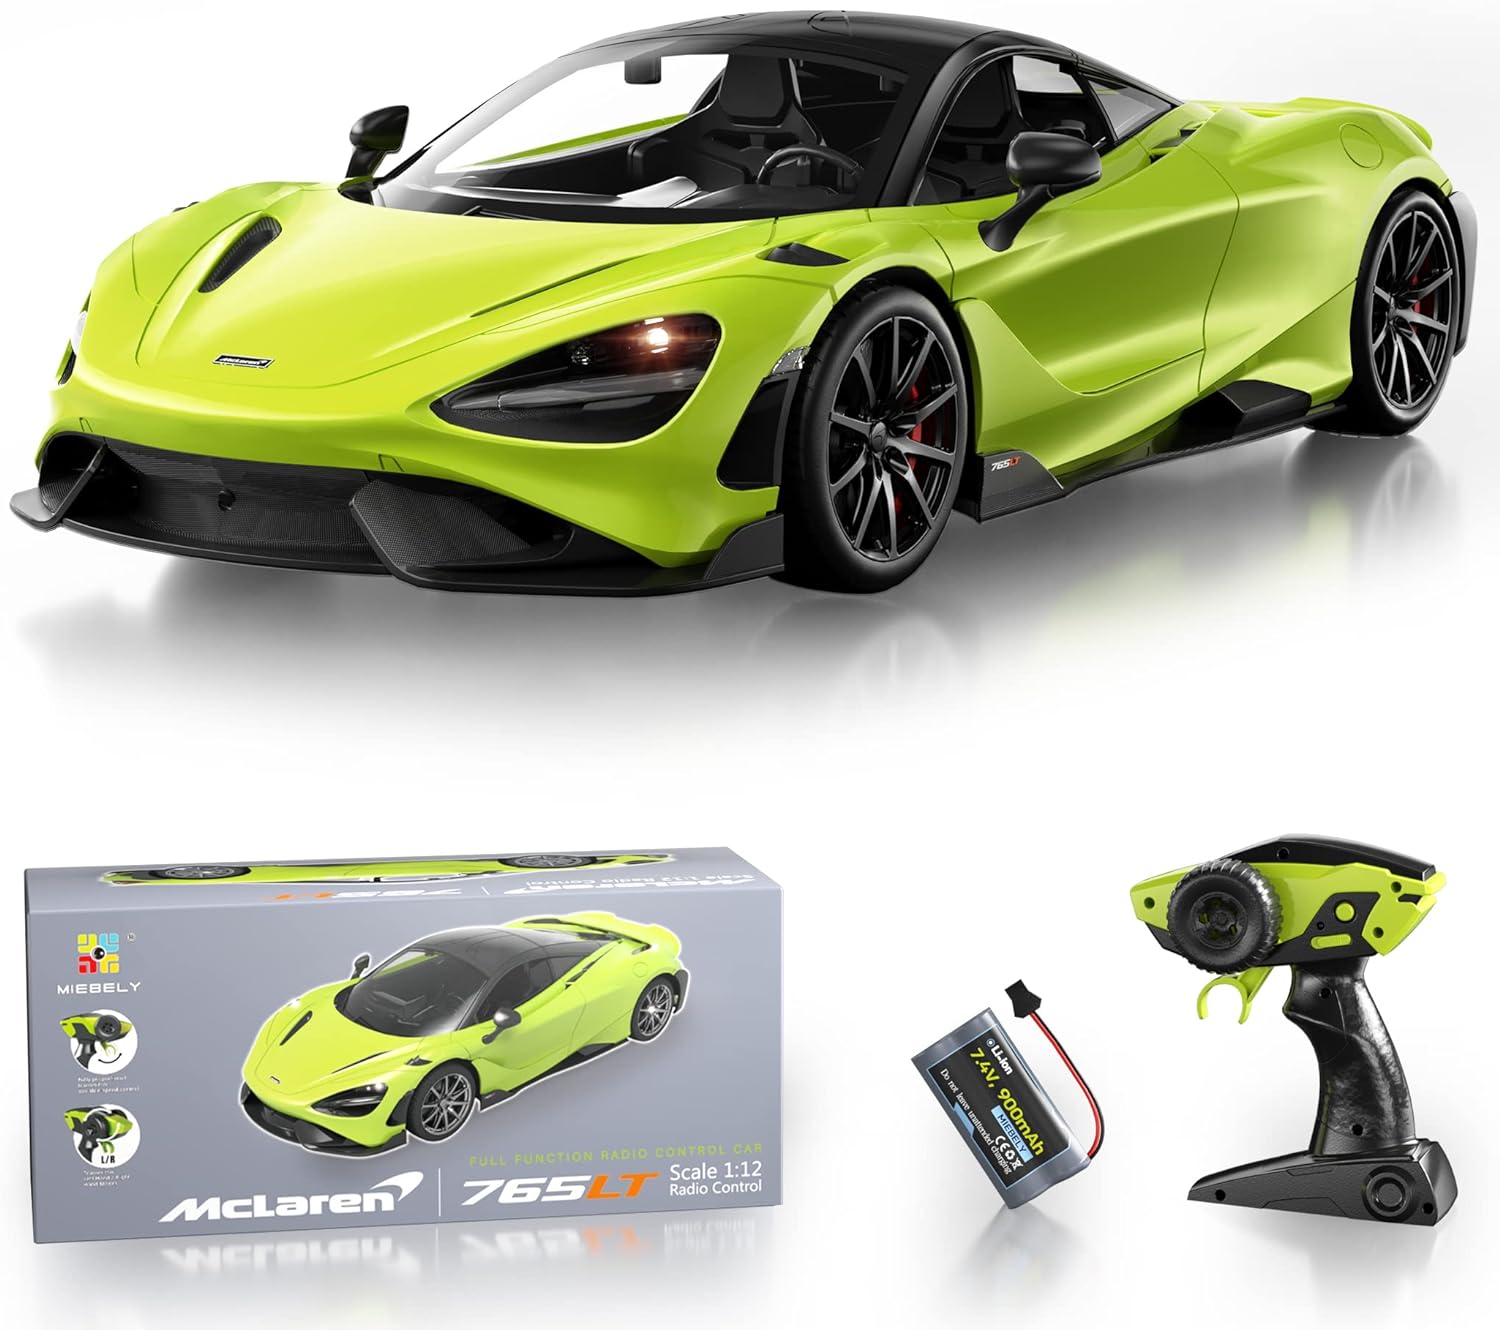 MIEBELY McLaren Rc Cars Remote Control Car